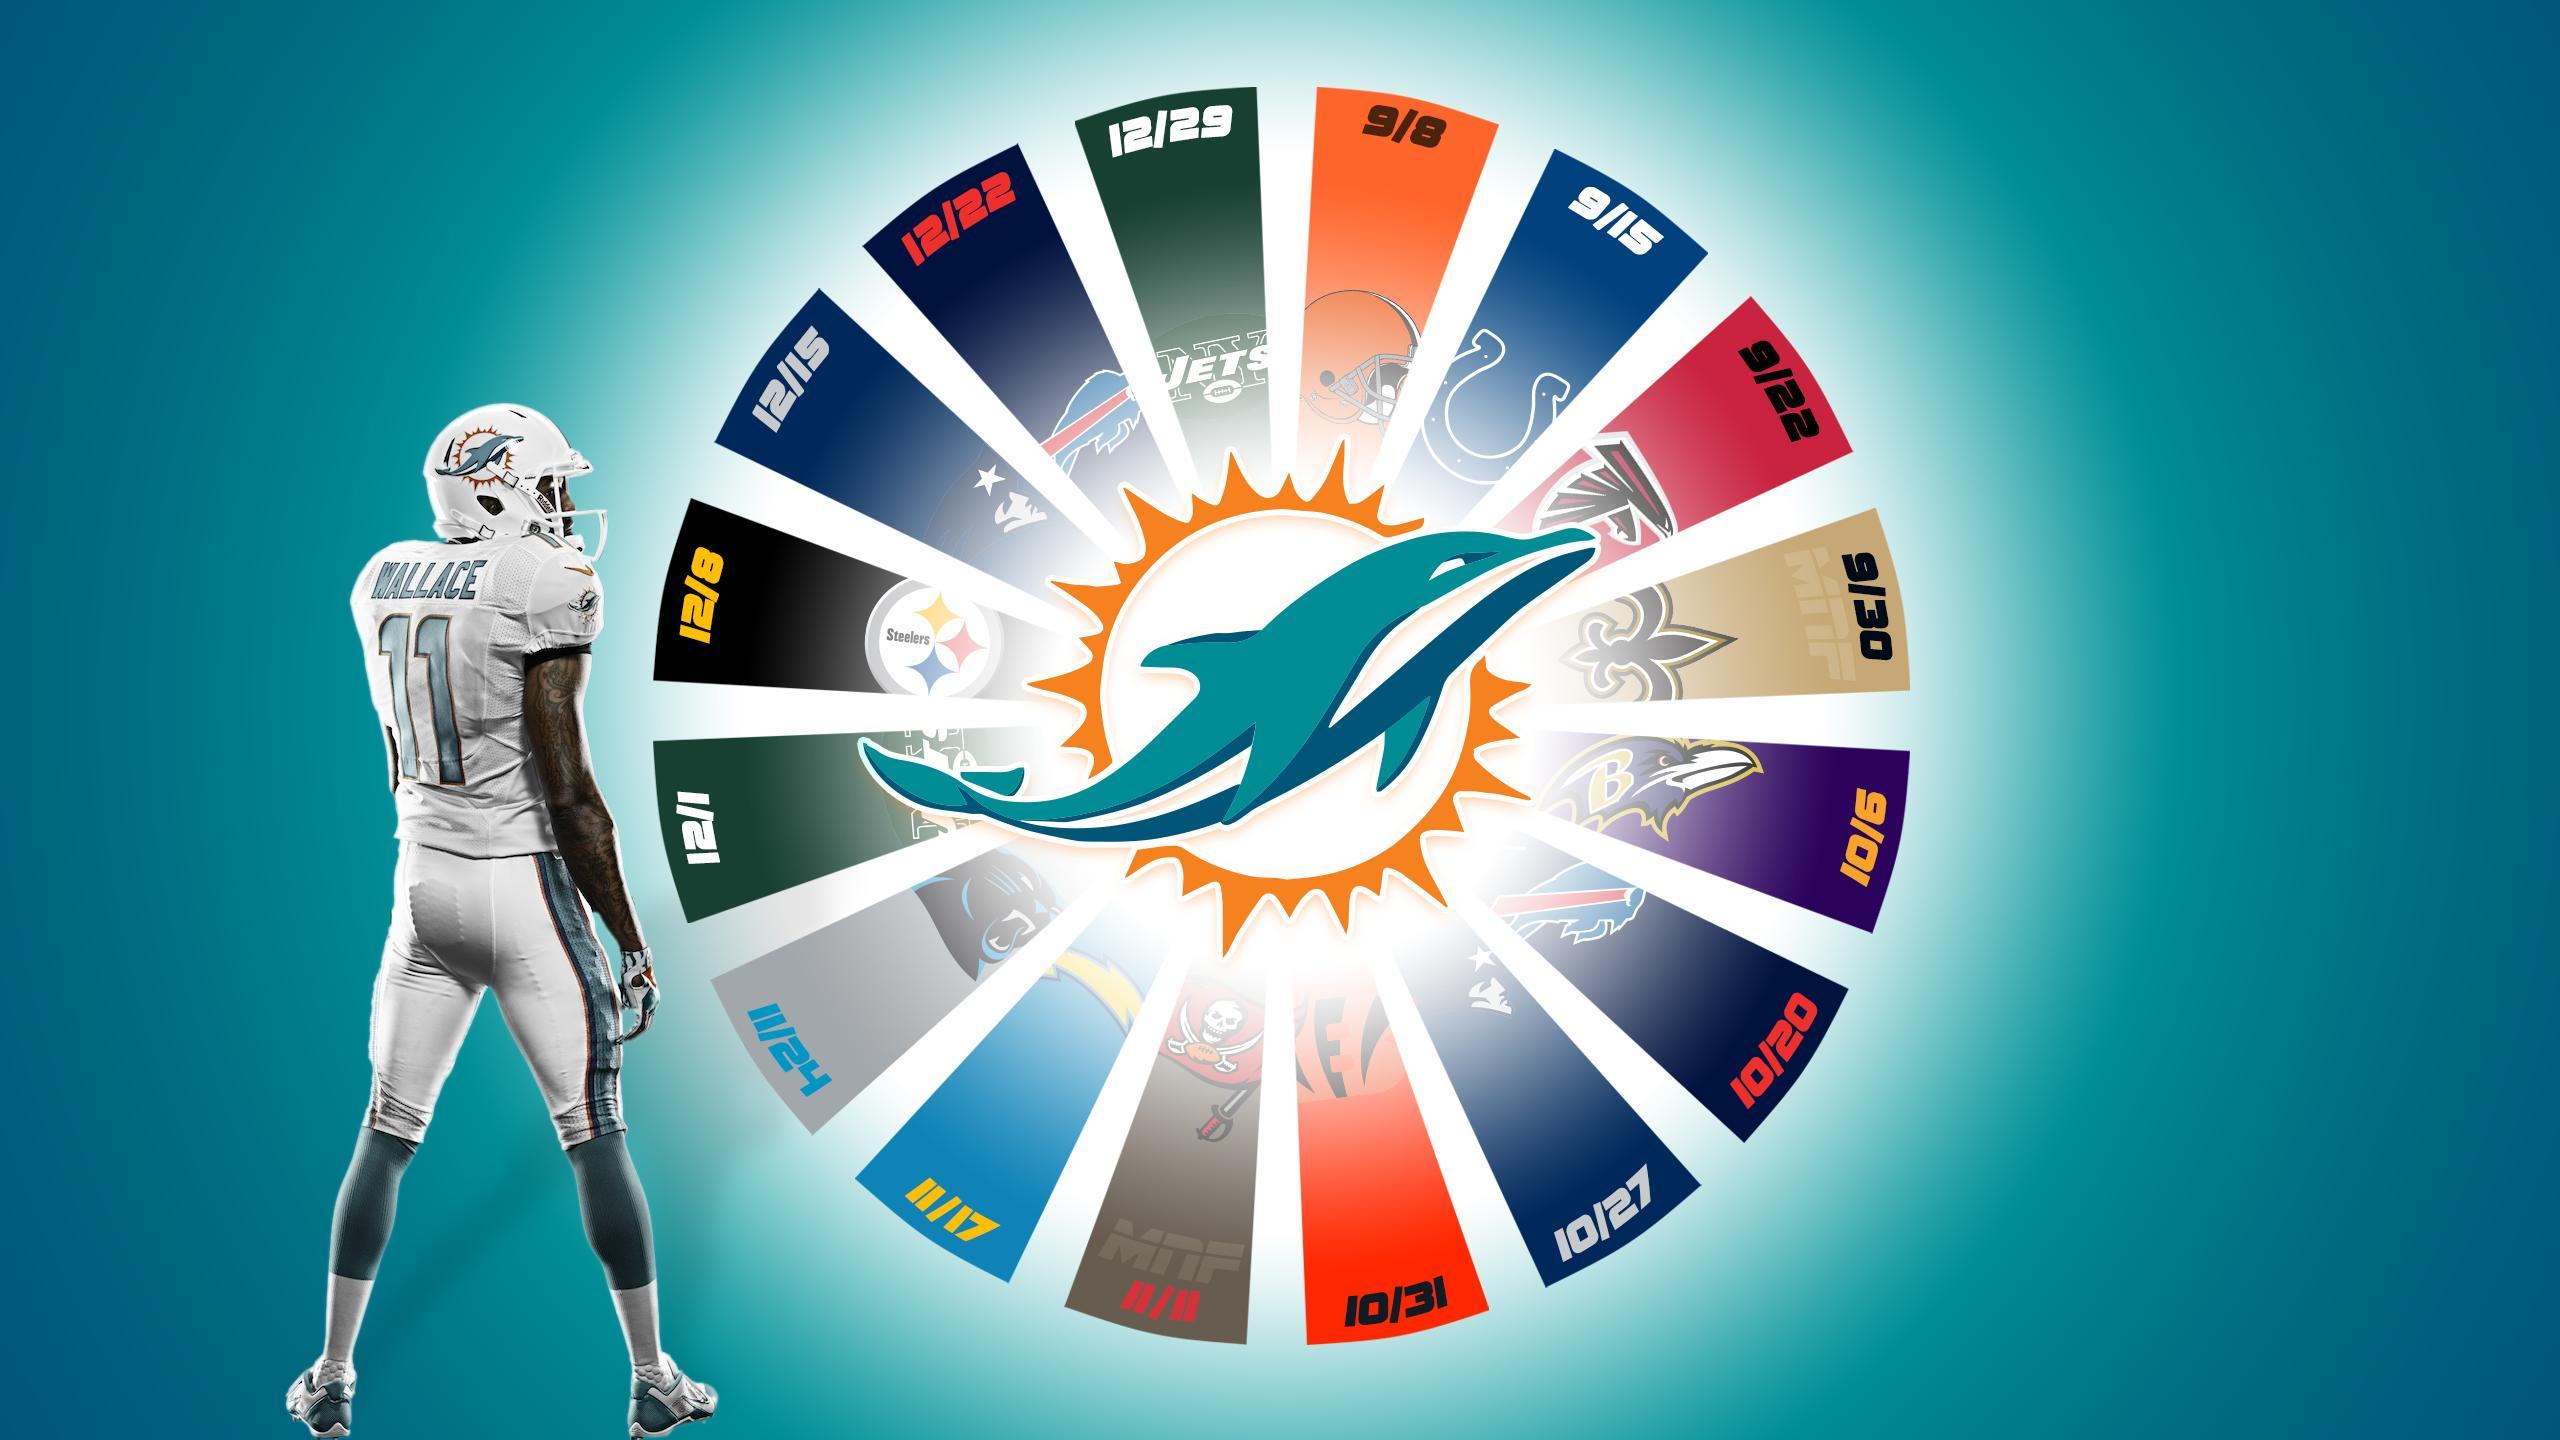 FB97 HDQ Cover NFL Miami Dolphins Wallpaper, NFL Miami Dolphins